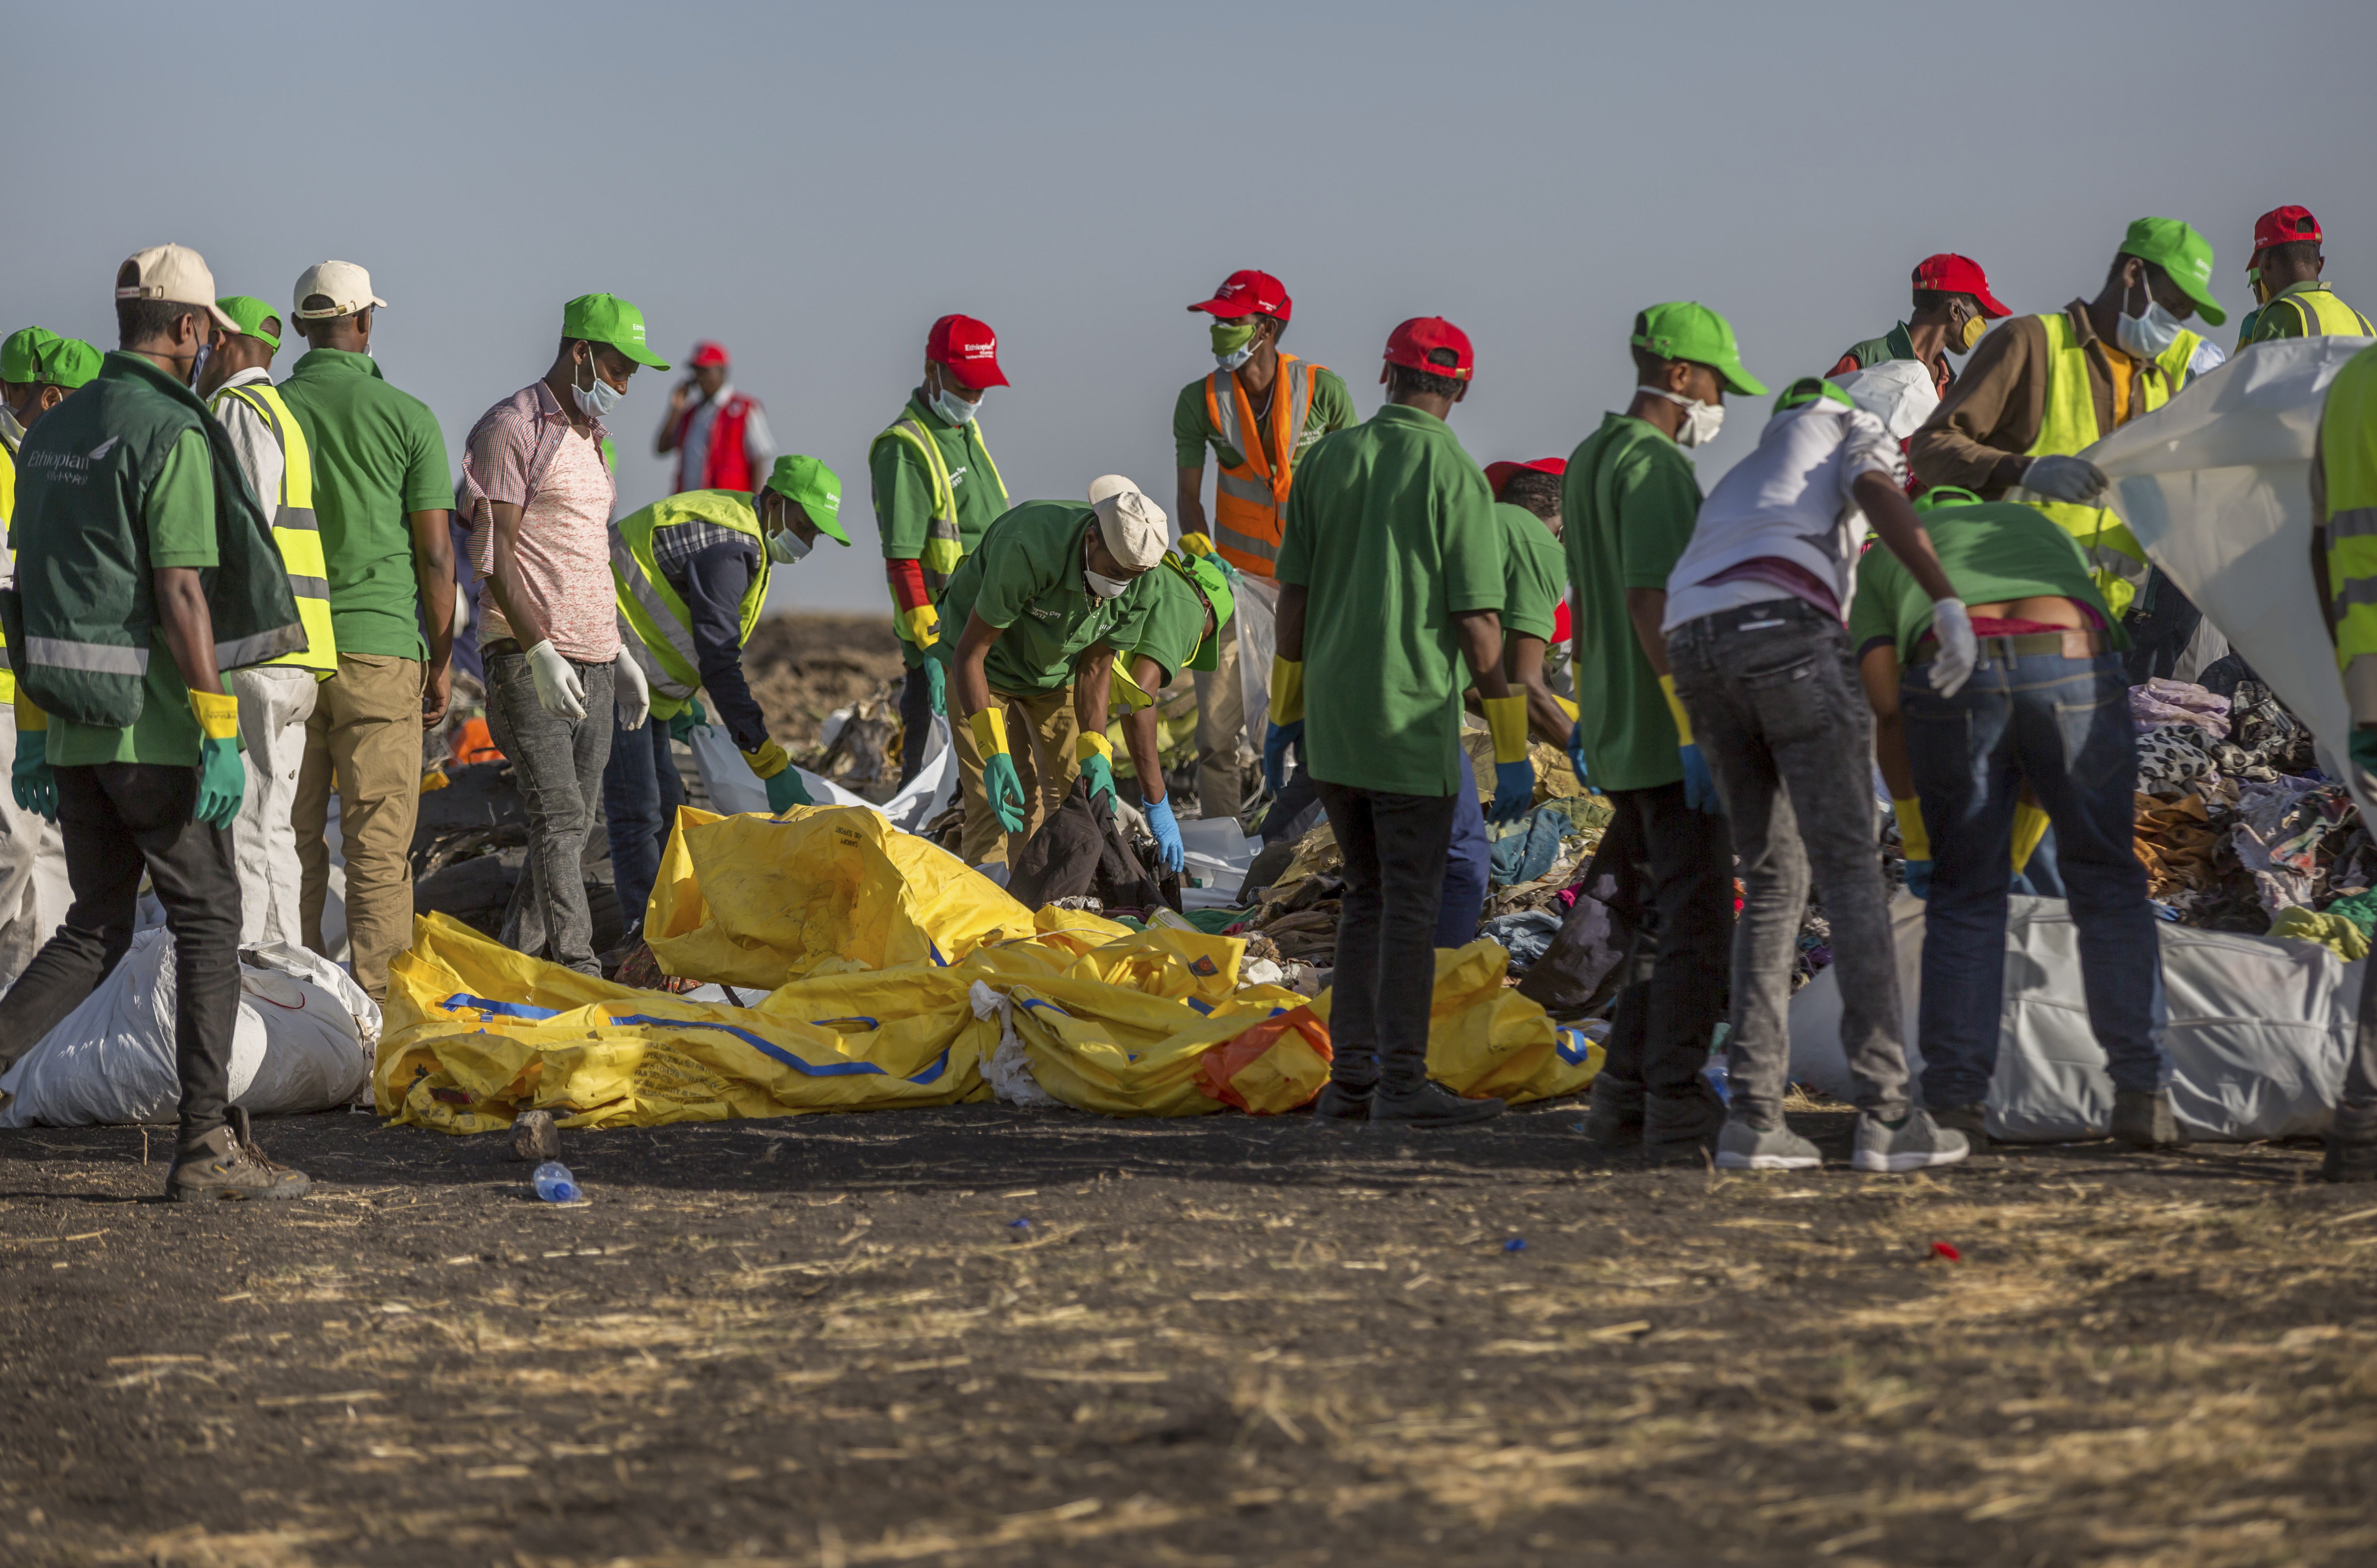 Workers at the scene of a plane crash in Ethiopia